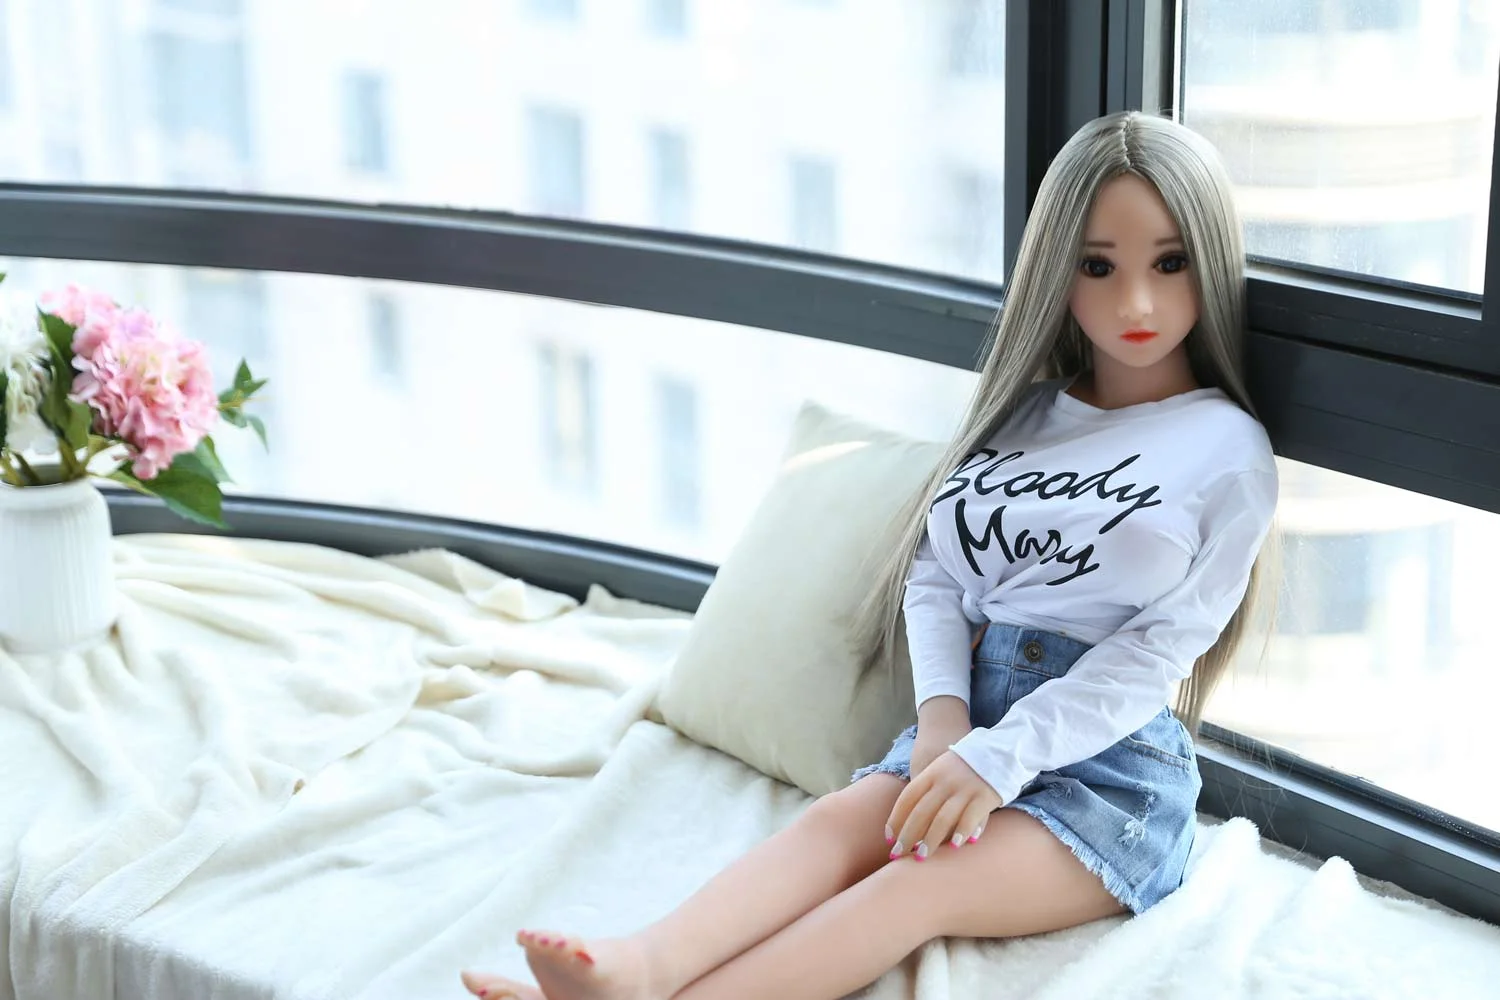 Mini sex doll leaning on the window